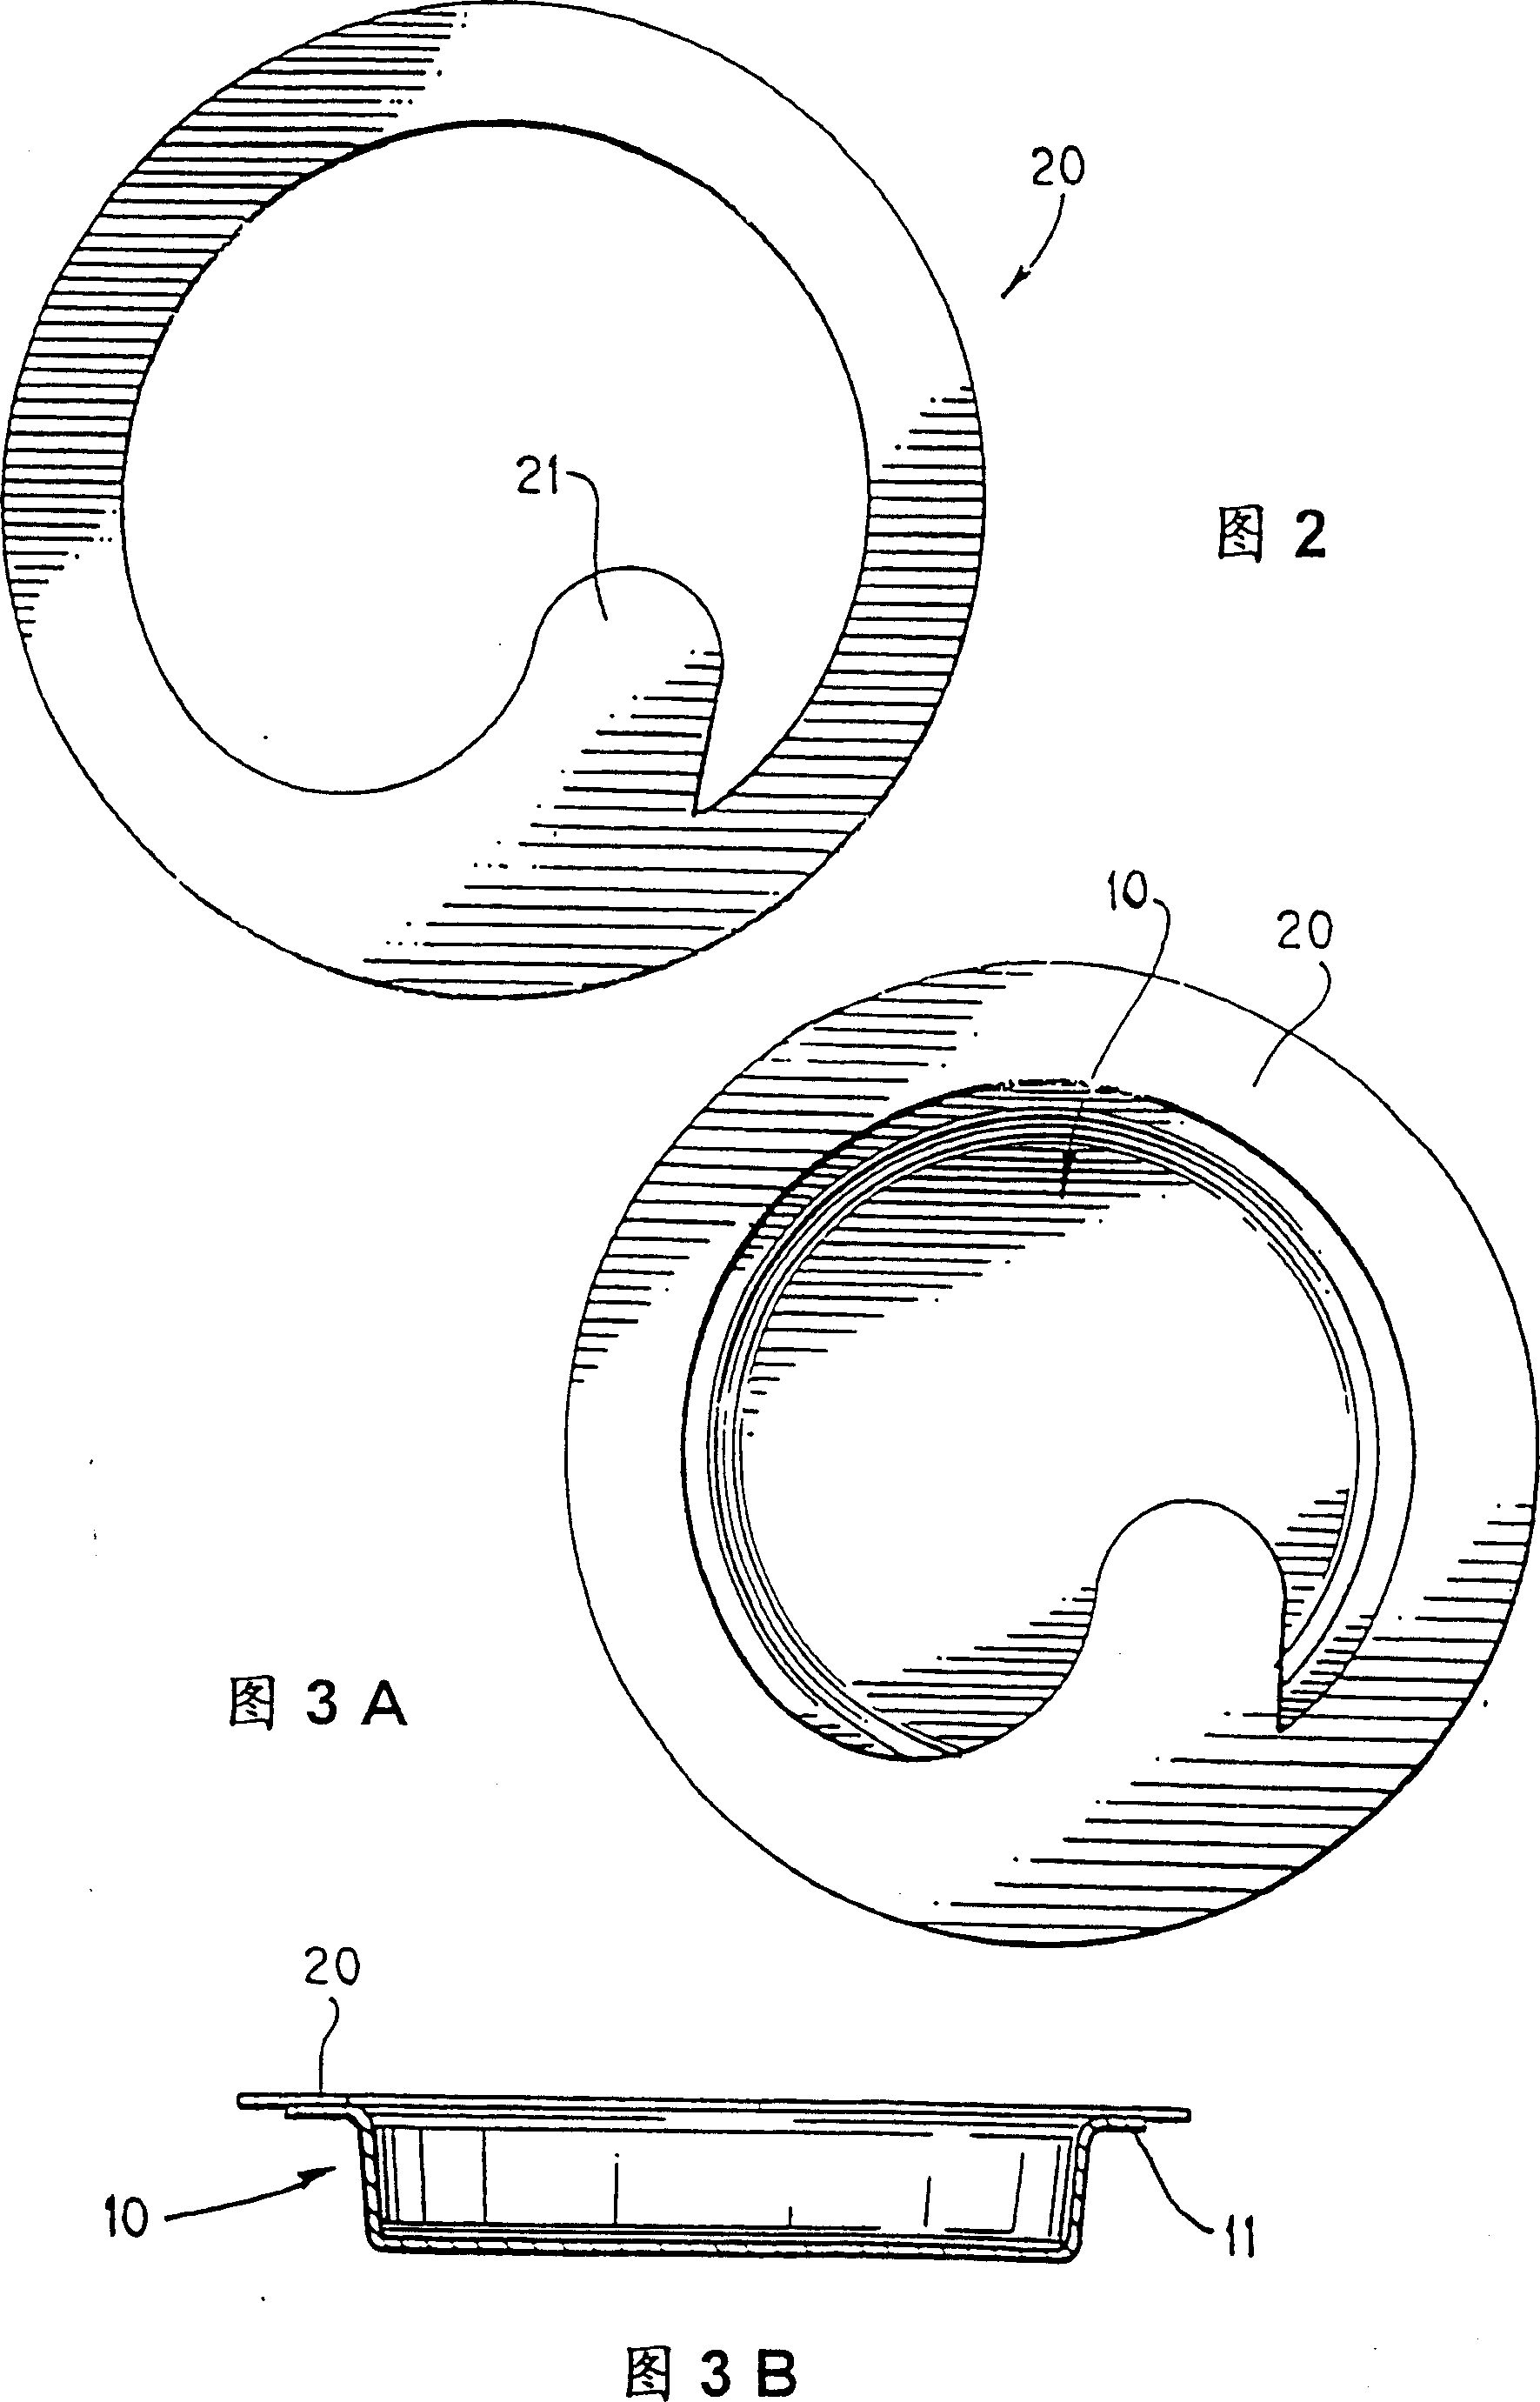 Method and package design for cryopreservation and storage of cultured tissue equivalents